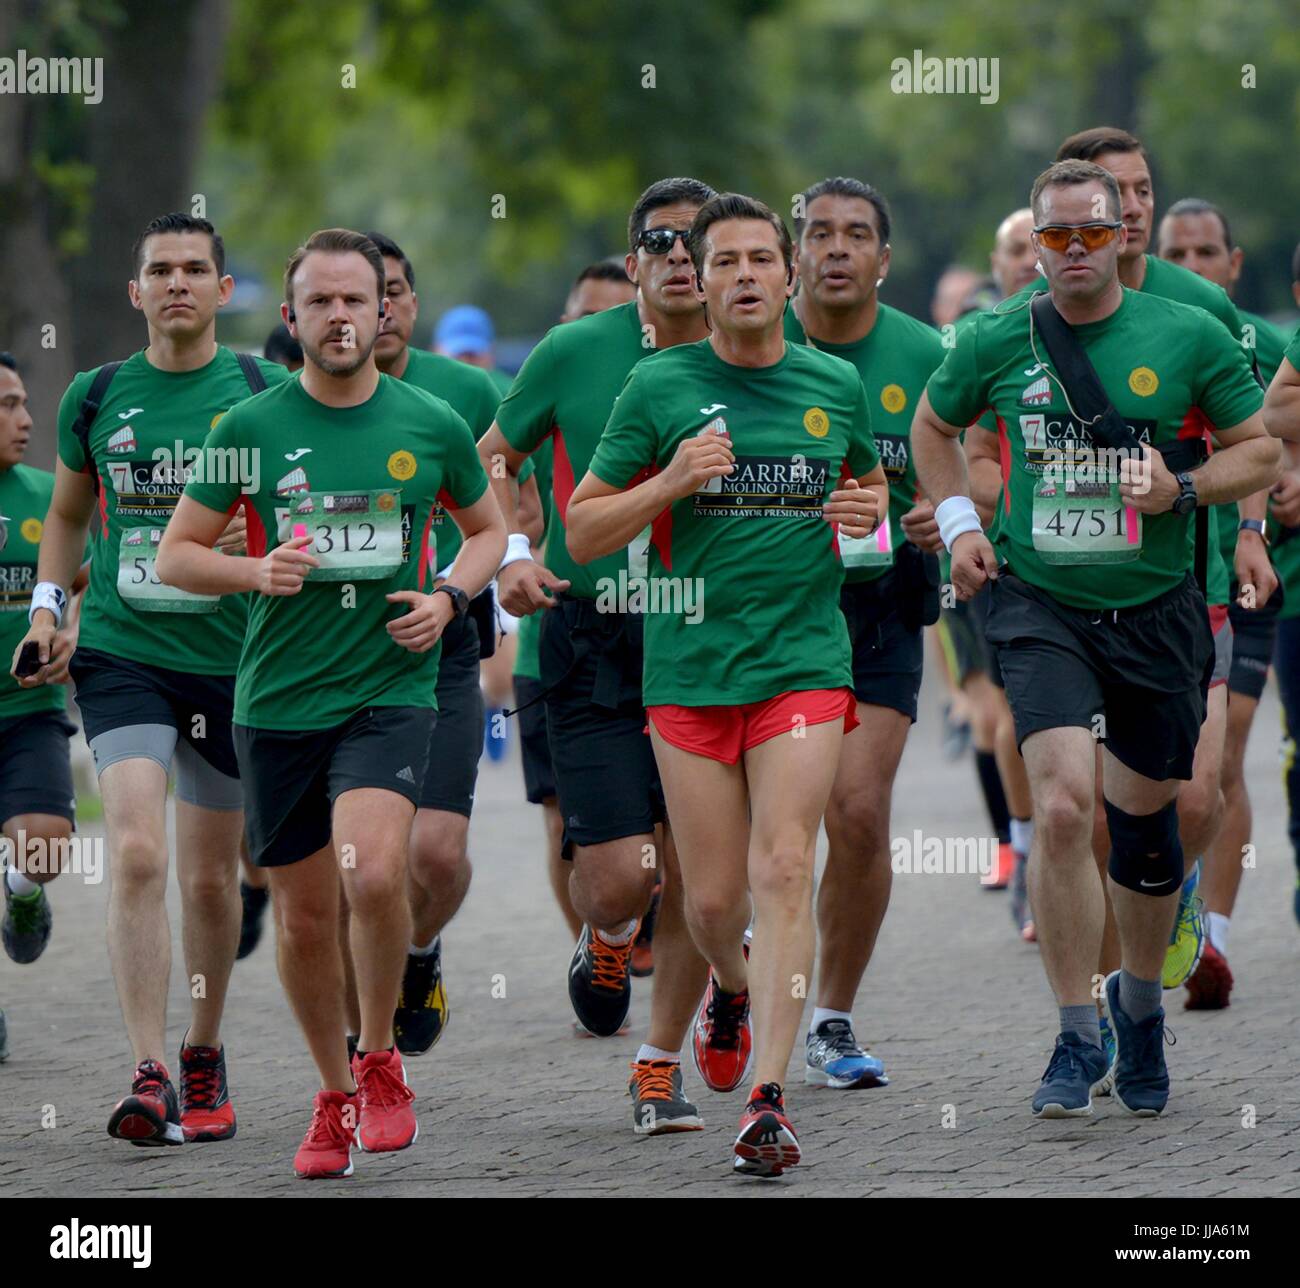 Mexico City, Mexico. 18th July, 2017. Mexican President Enrique Pena Nieto, center, takes part in the 7th Molino del Rey race in the forest of Chapultepec July 17, 2017 in Mexico City, Mexico. (presidenciamx via Planetpix) Stock Photo